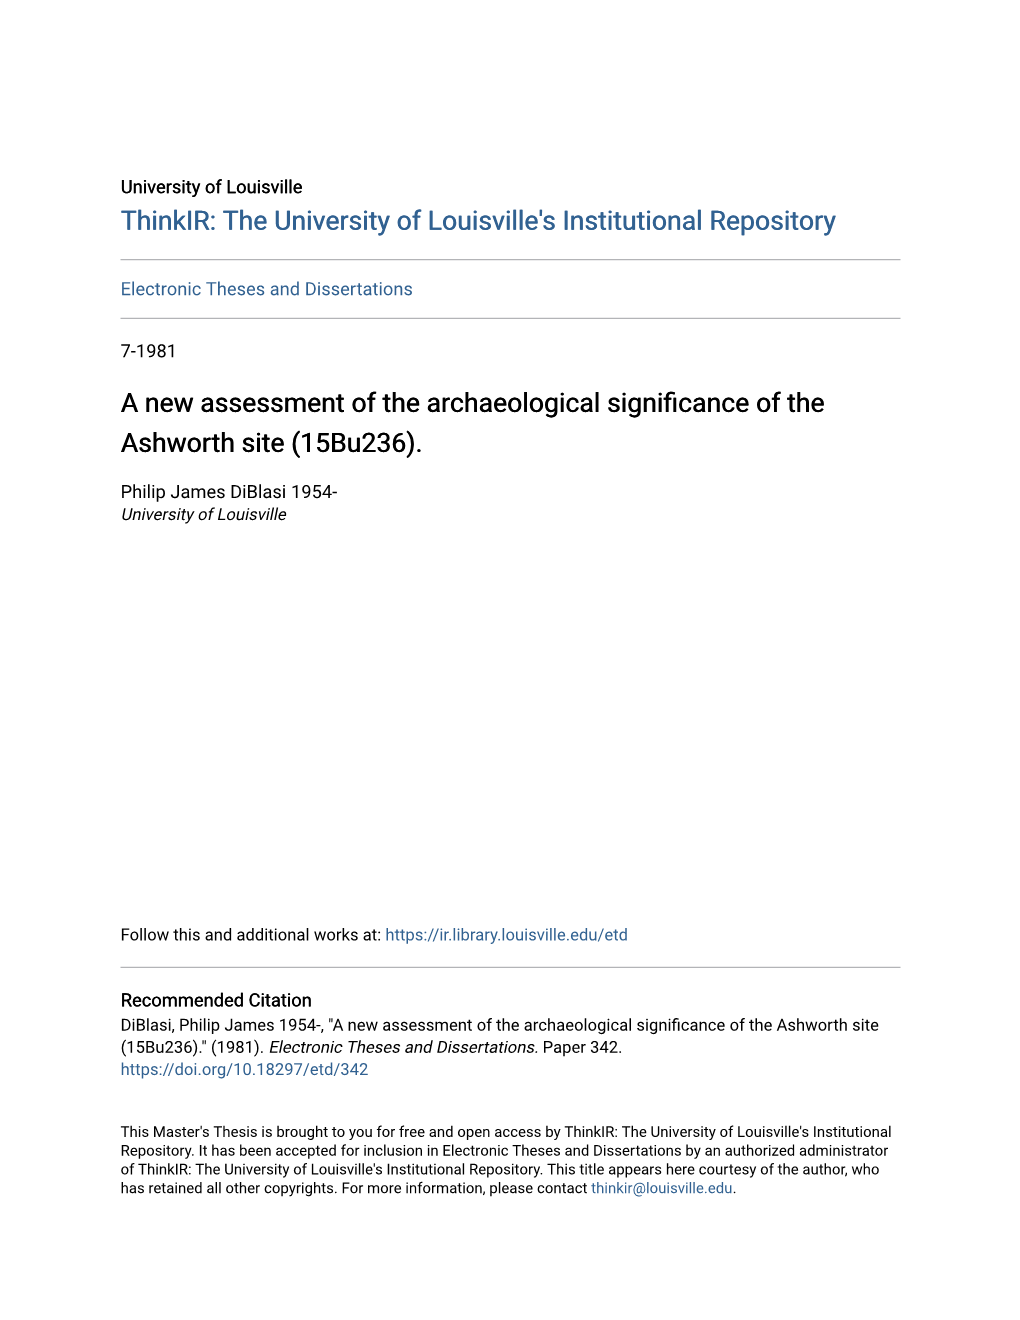 A New Assessment of the Archaeological Significance of the Ashworth Site (15Bu236)